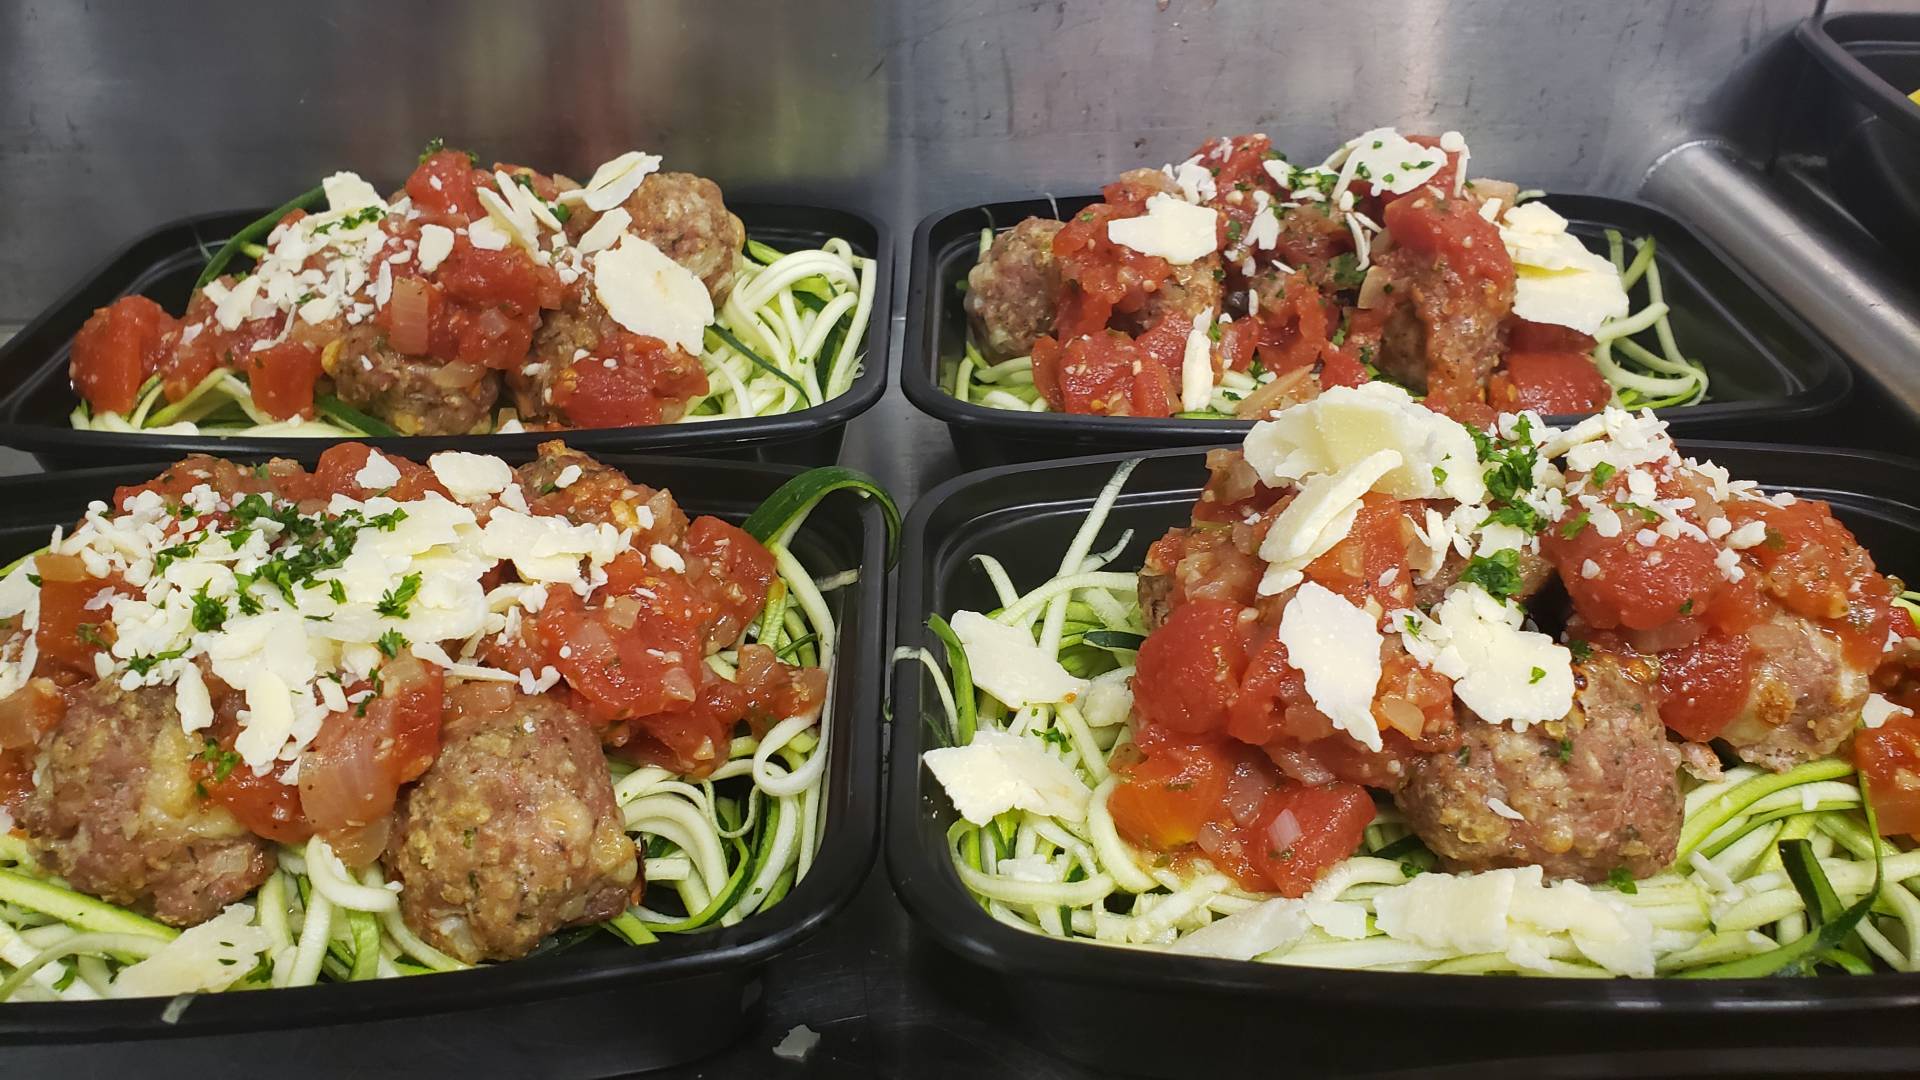 Spanish Meat Ball w/ zucchini noodles